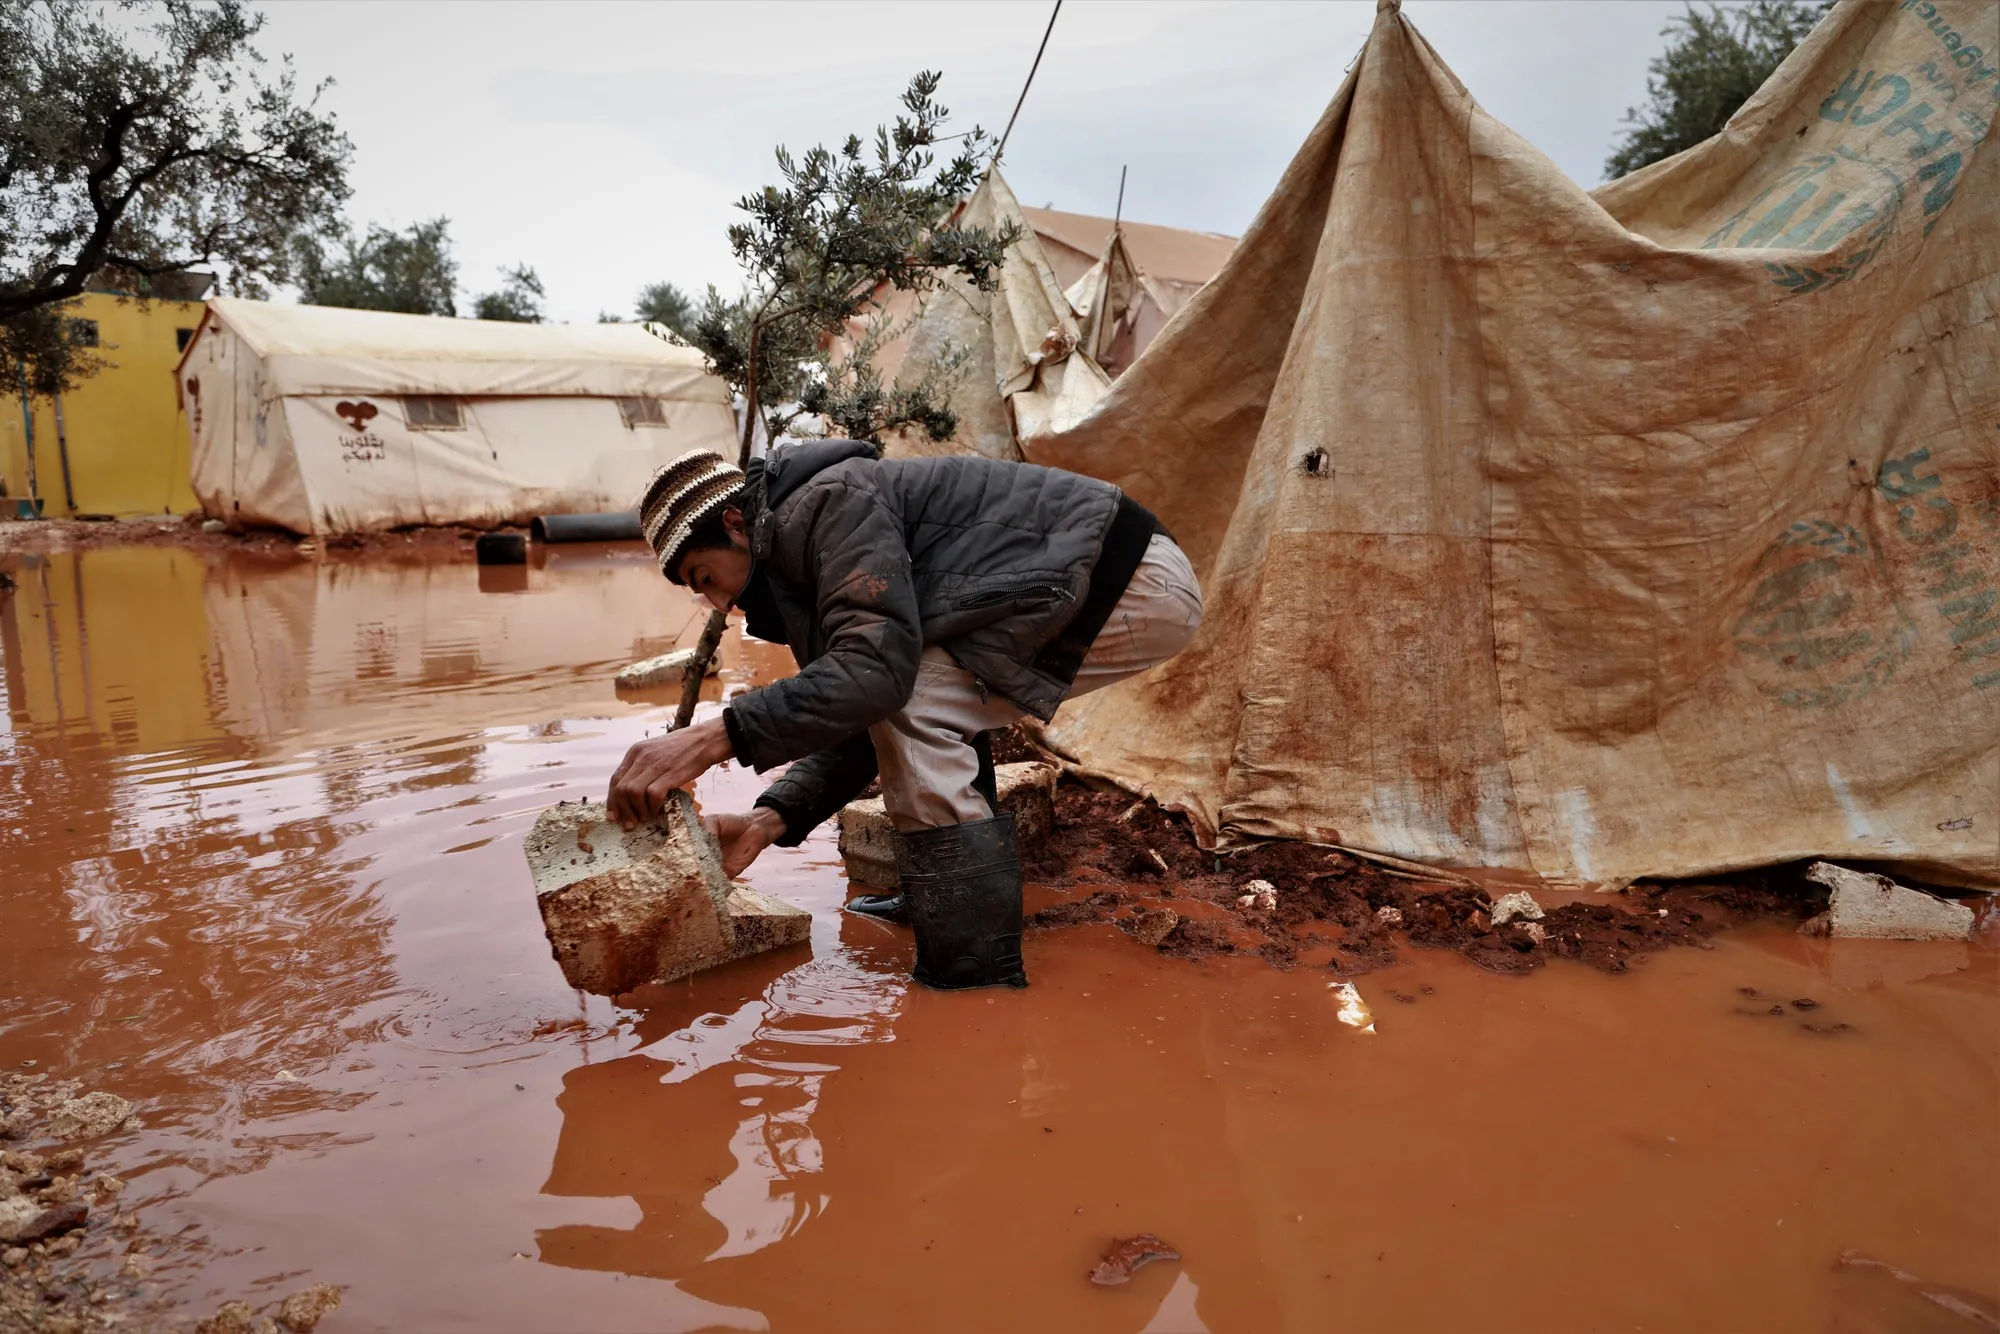 A man bends down outside of a flooded tent in a camp.